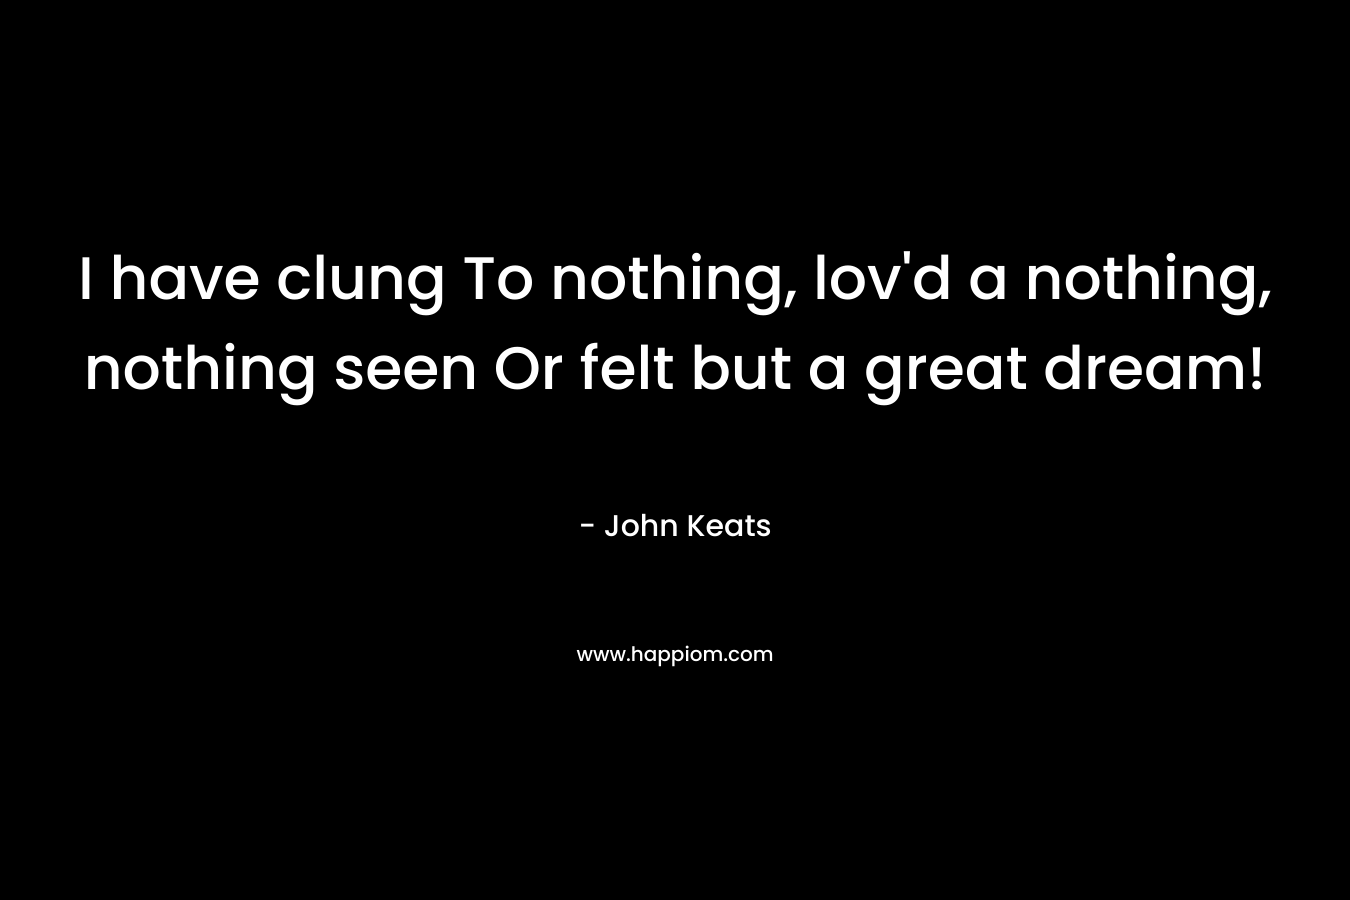 I have clung	To nothing, lov'd a nothing, nothing seen	Or felt but a great dream!